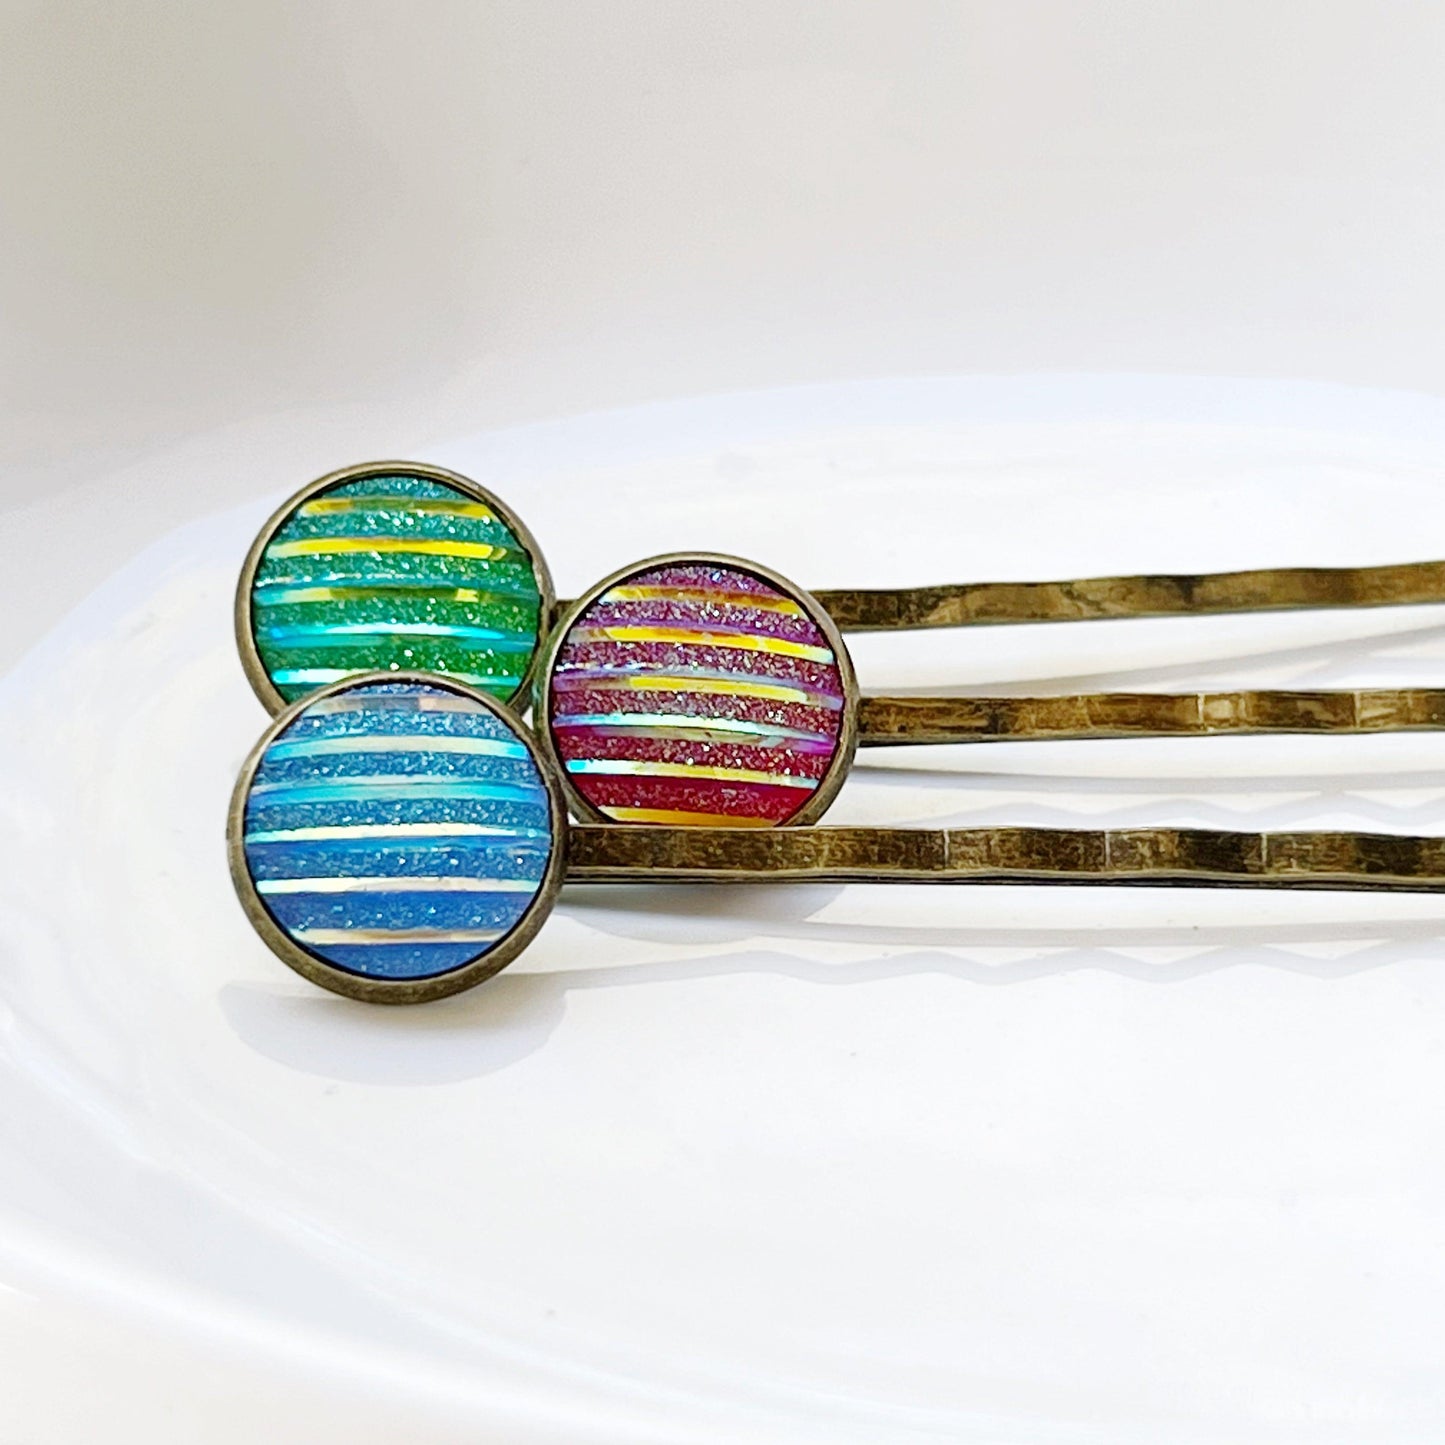 Green, Red, & Blue Striped Glitter Brass Hair Pins Set of 3- Sparkling & Colorful Hair Accessories